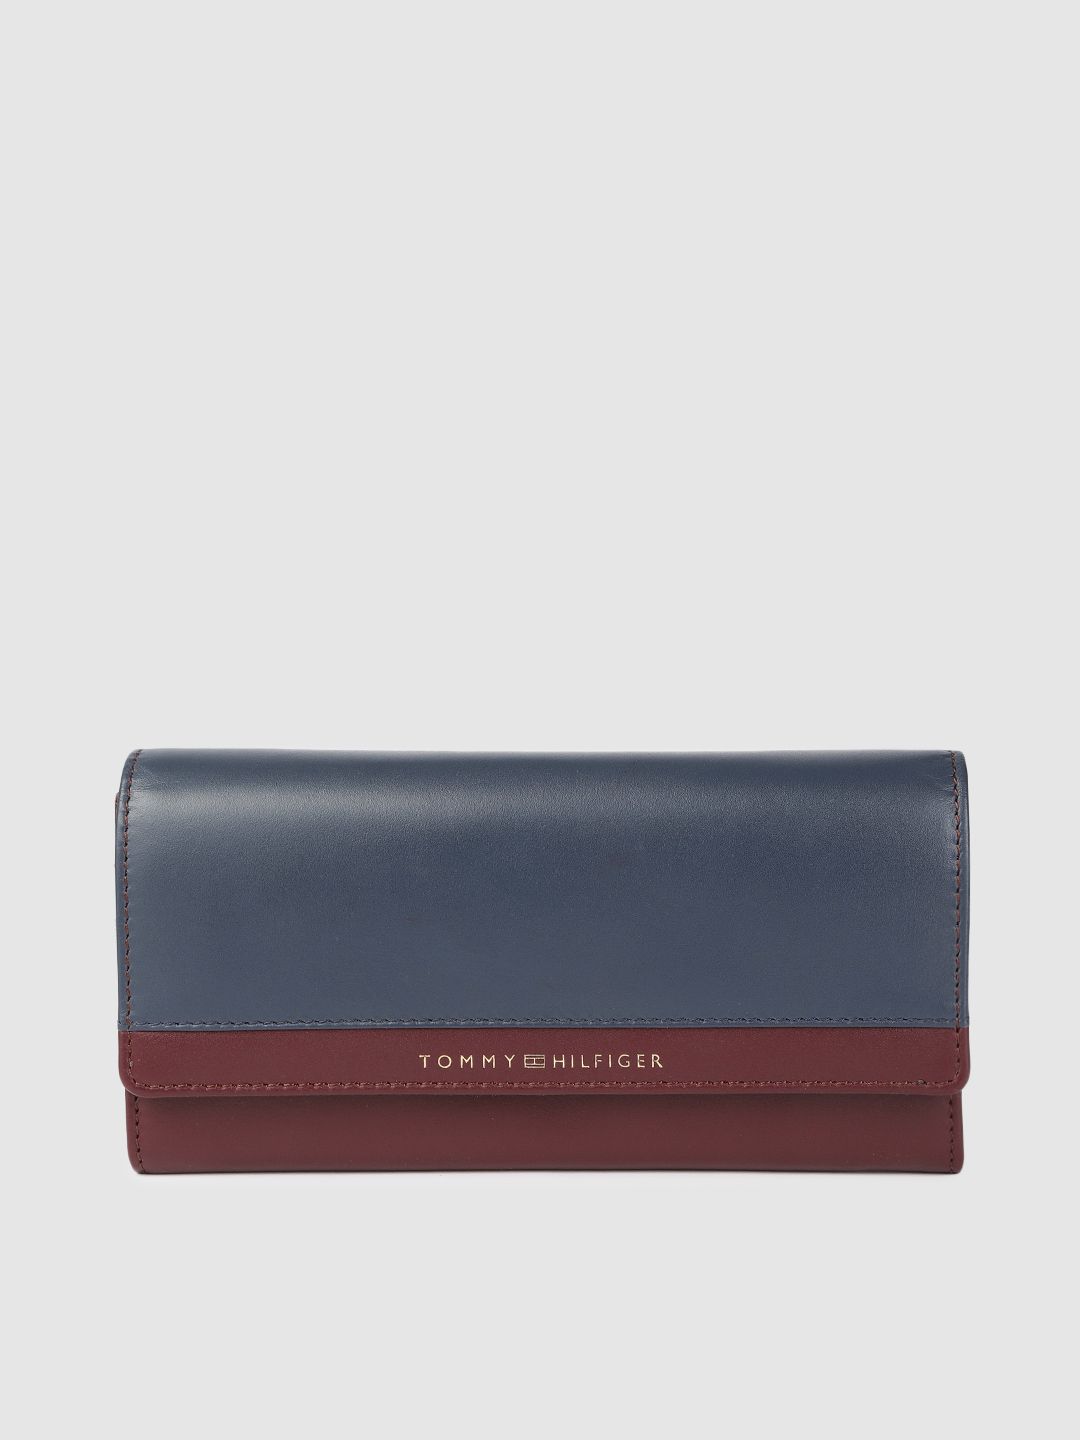 Tommy Hilfiger Women Burgundy & Navy Blue Solid Leather Two Fold Wallet Price in India